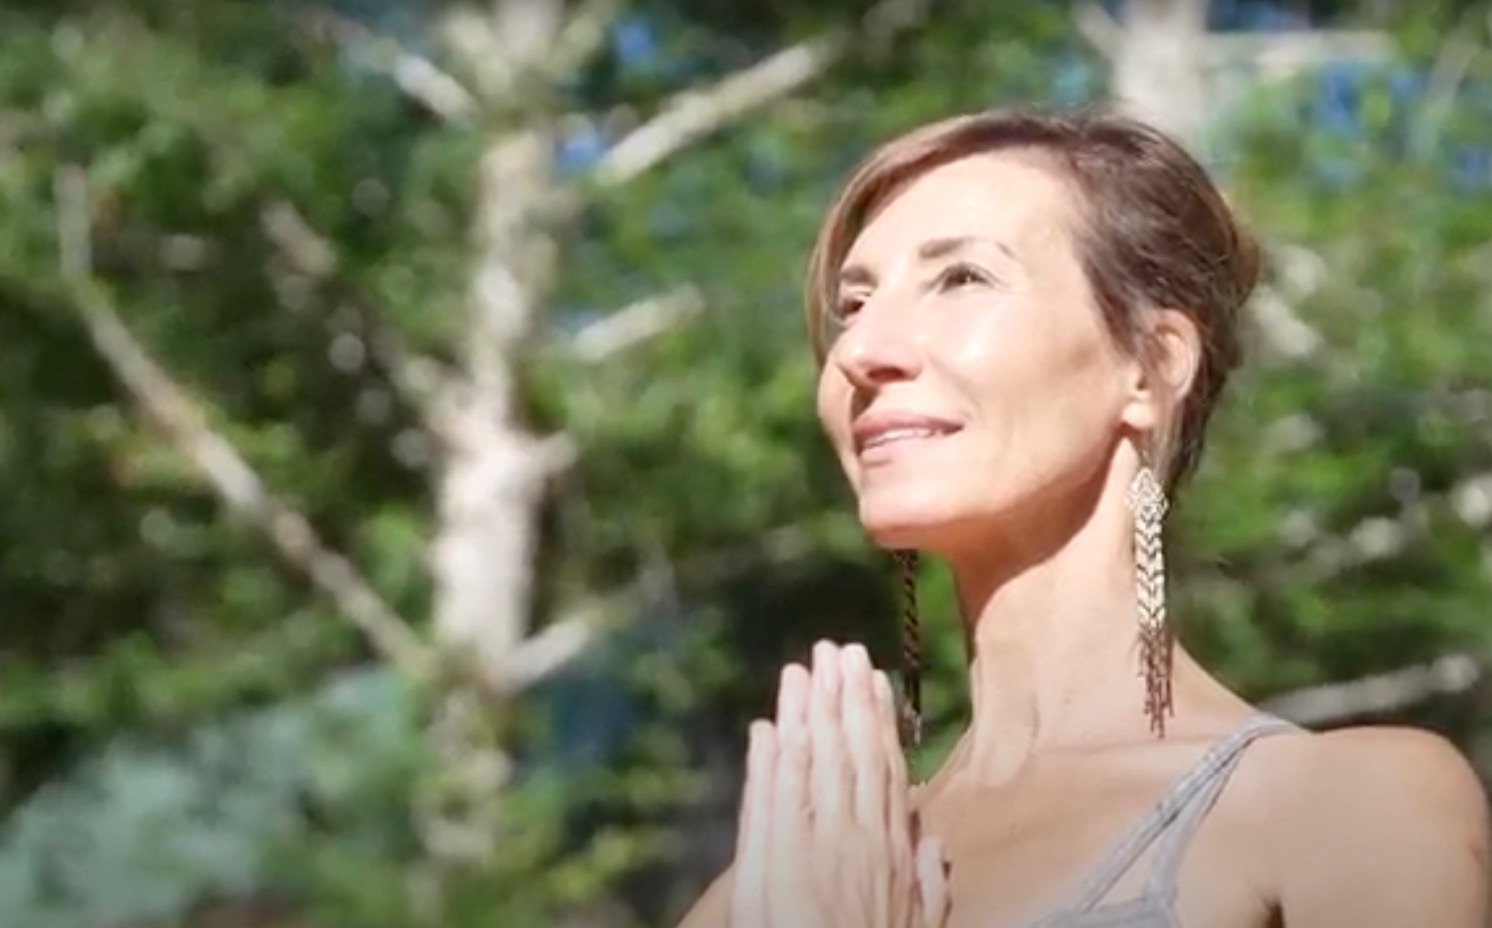 The Science Behind the Healing Power of Prayer